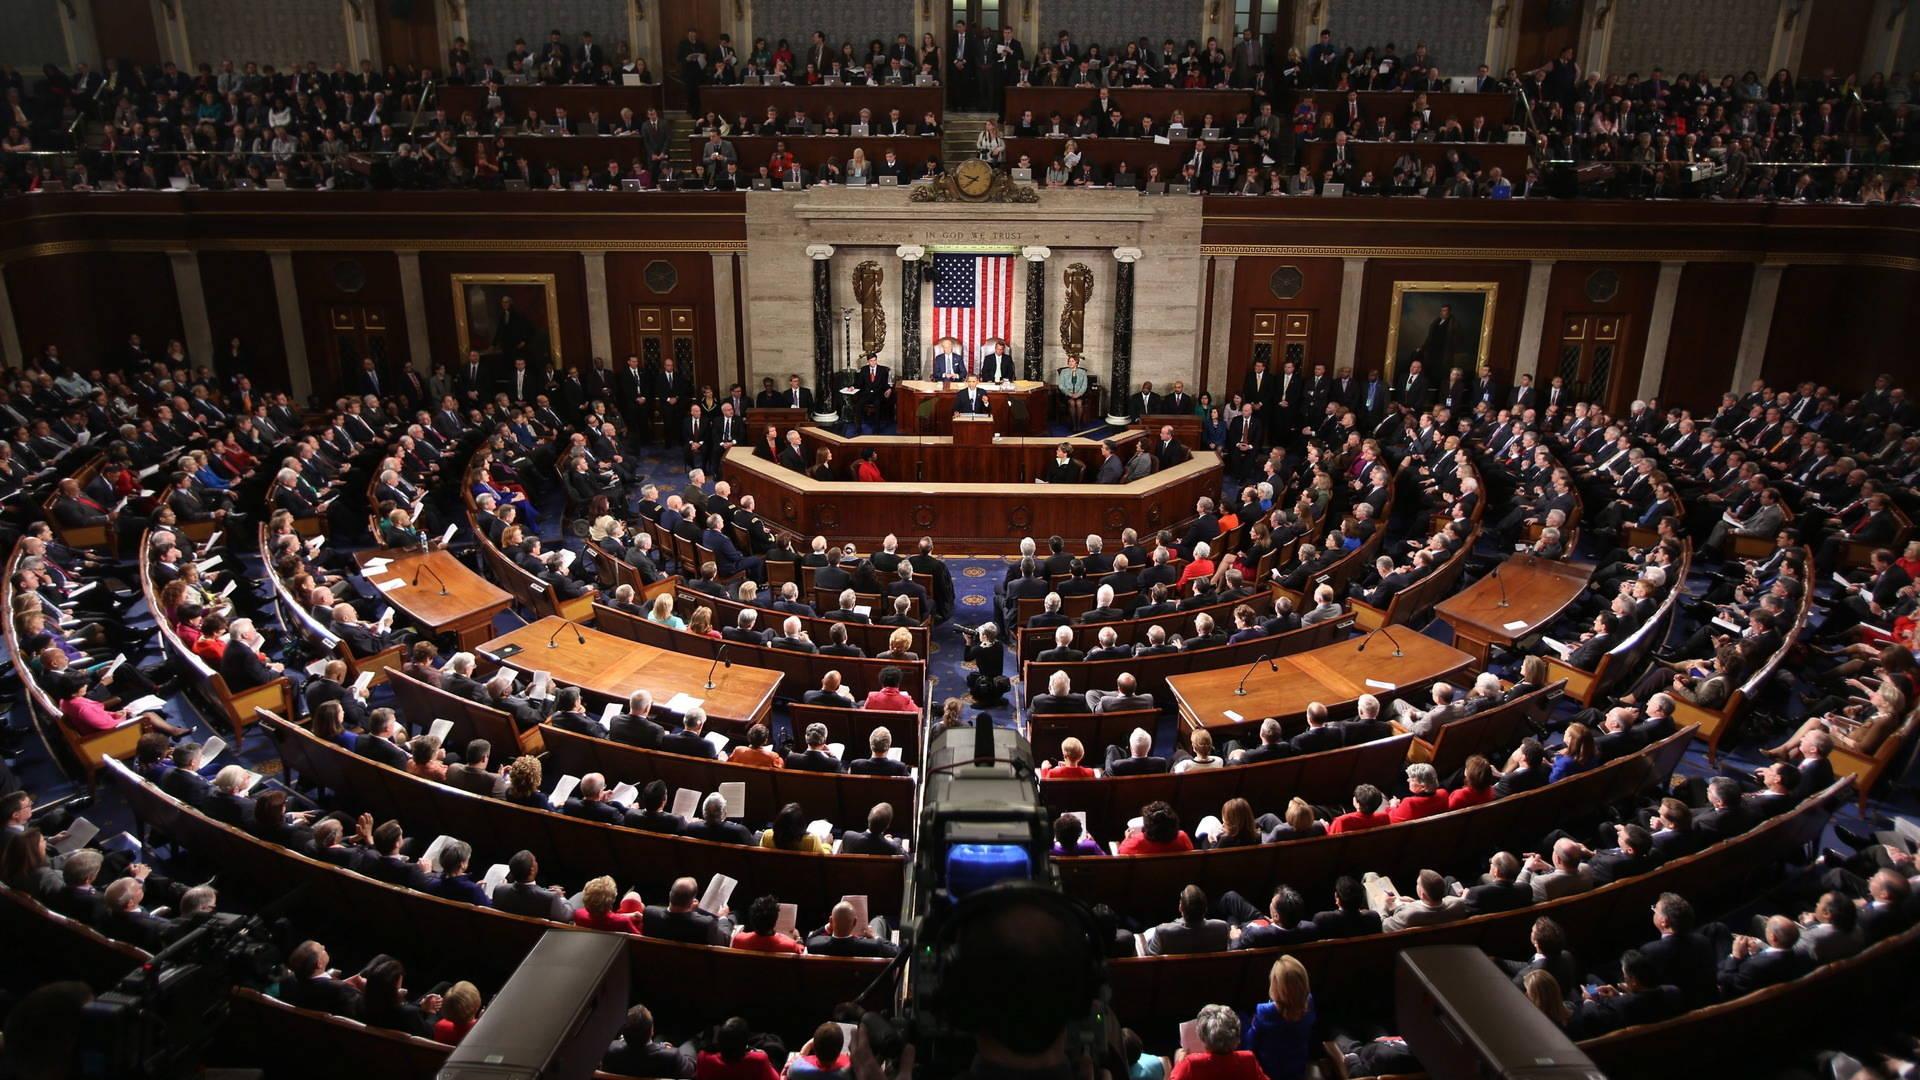 background essay the nature of representation in the us congress